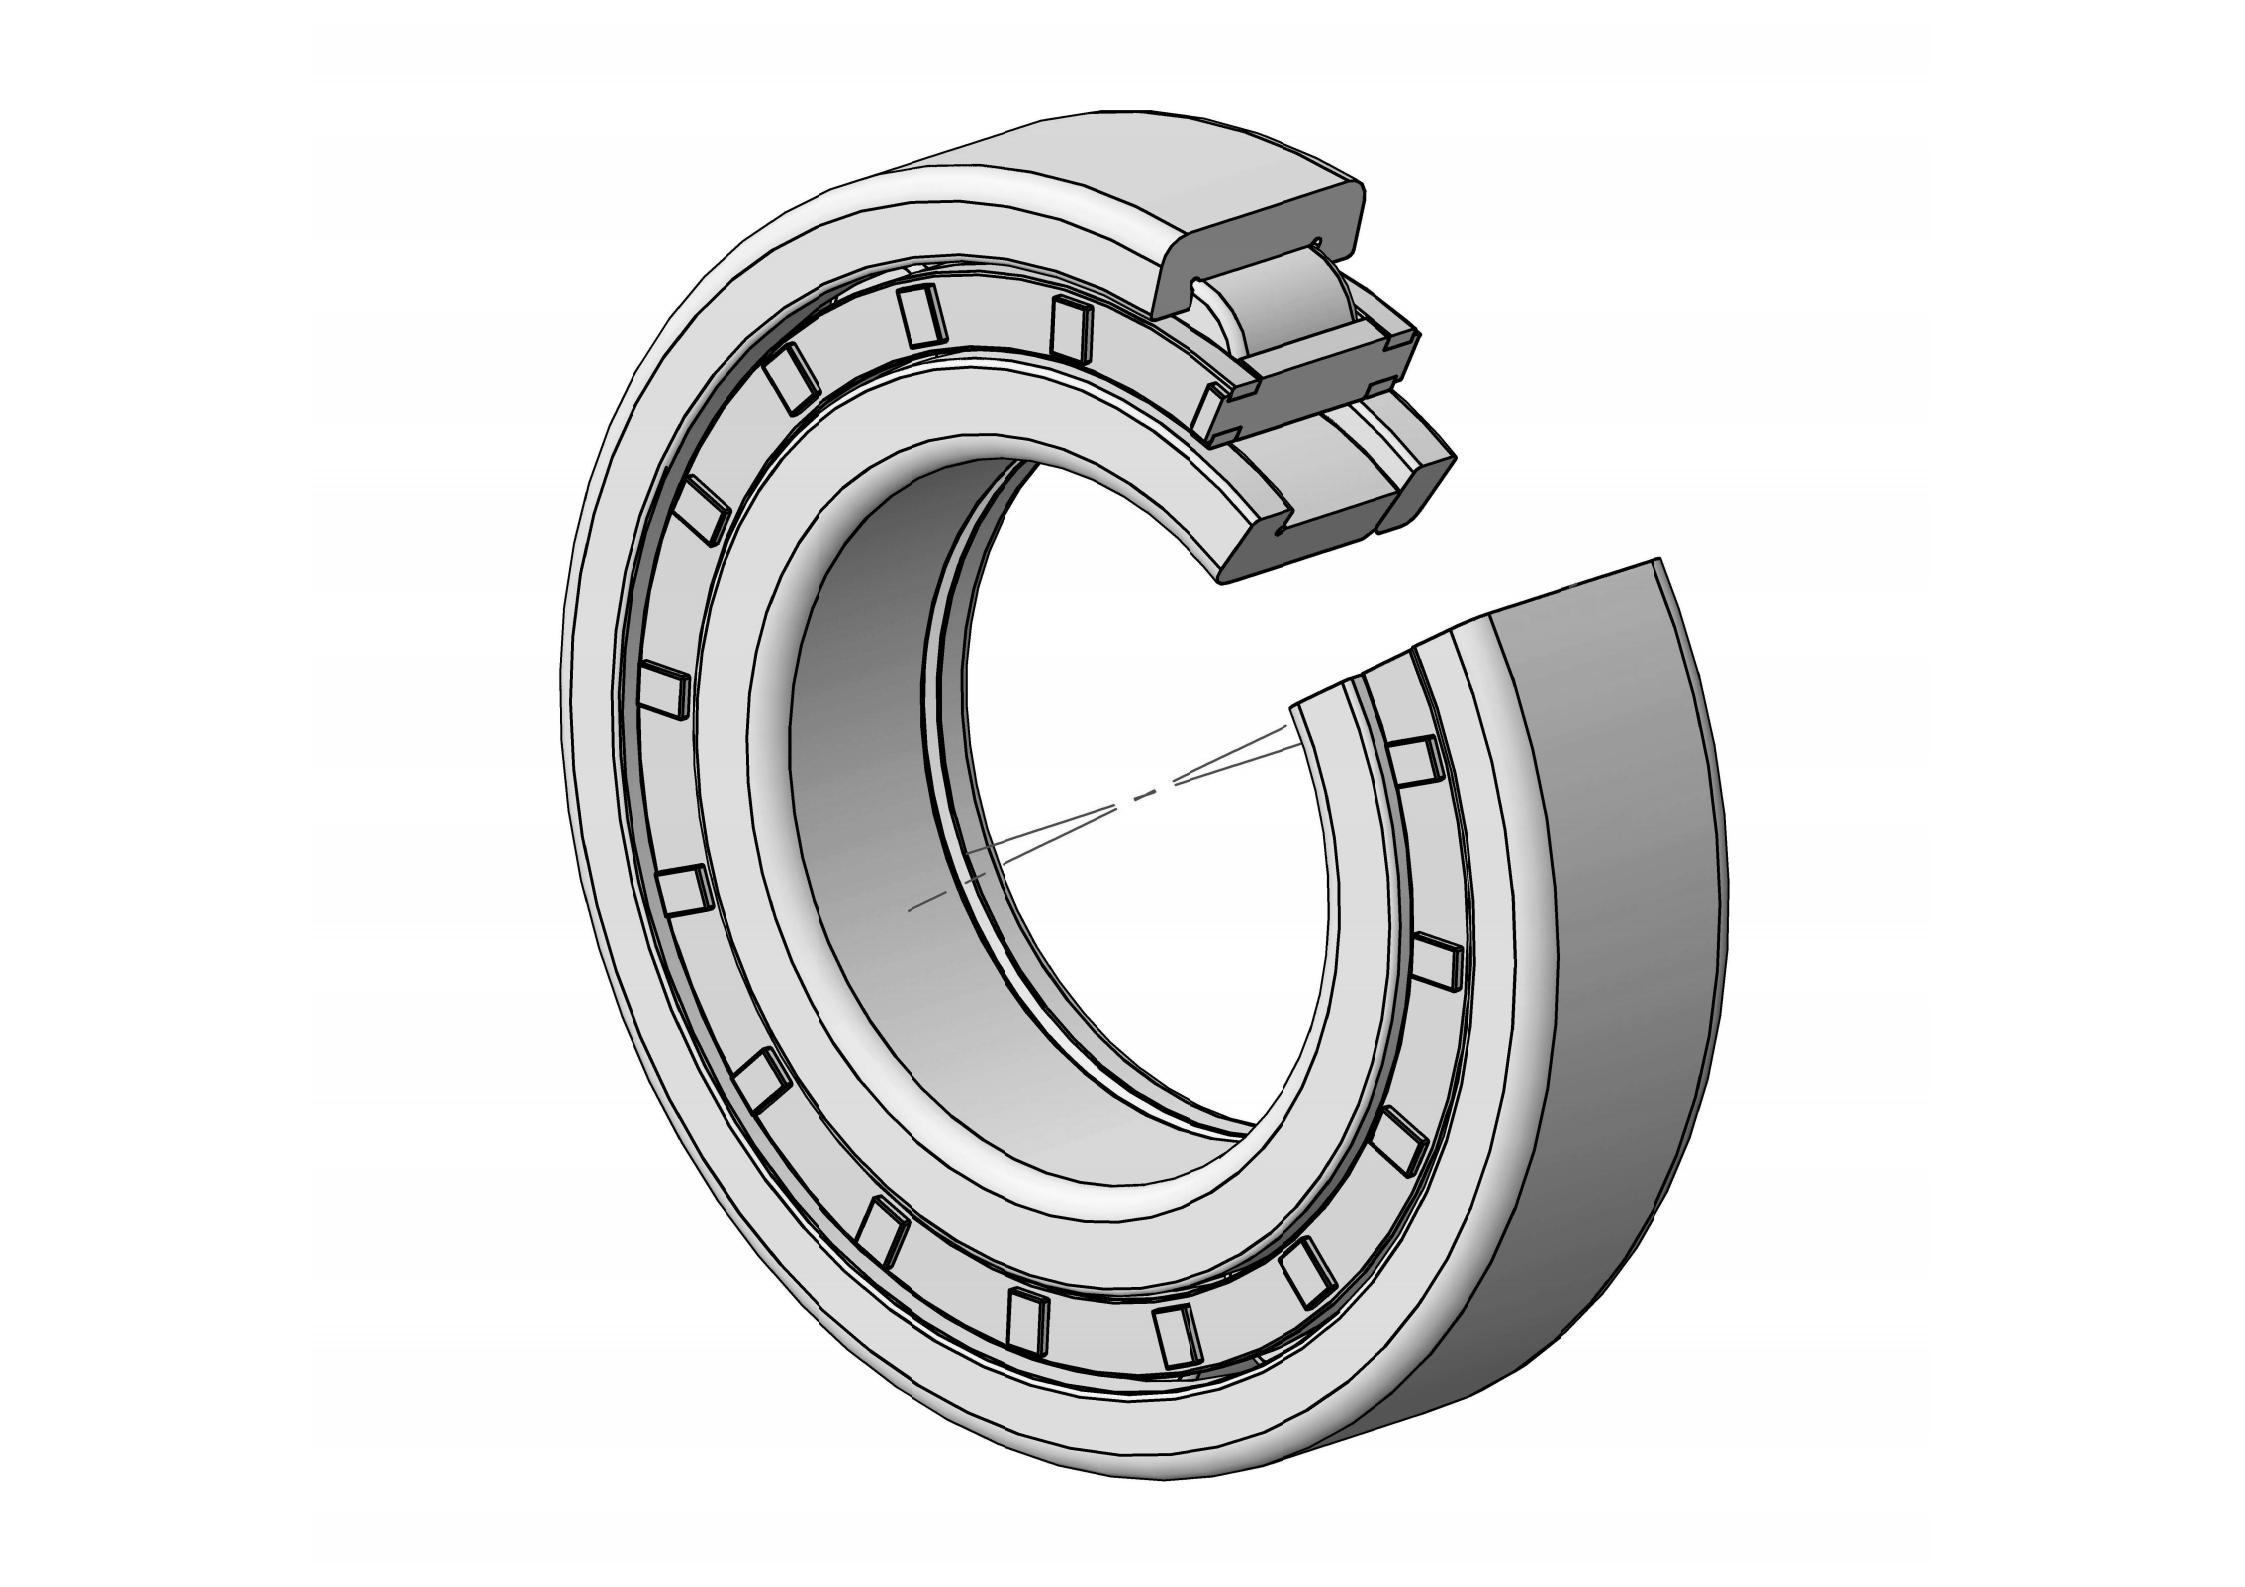 NUP203-E Single Row Cylindrical roller bearing 